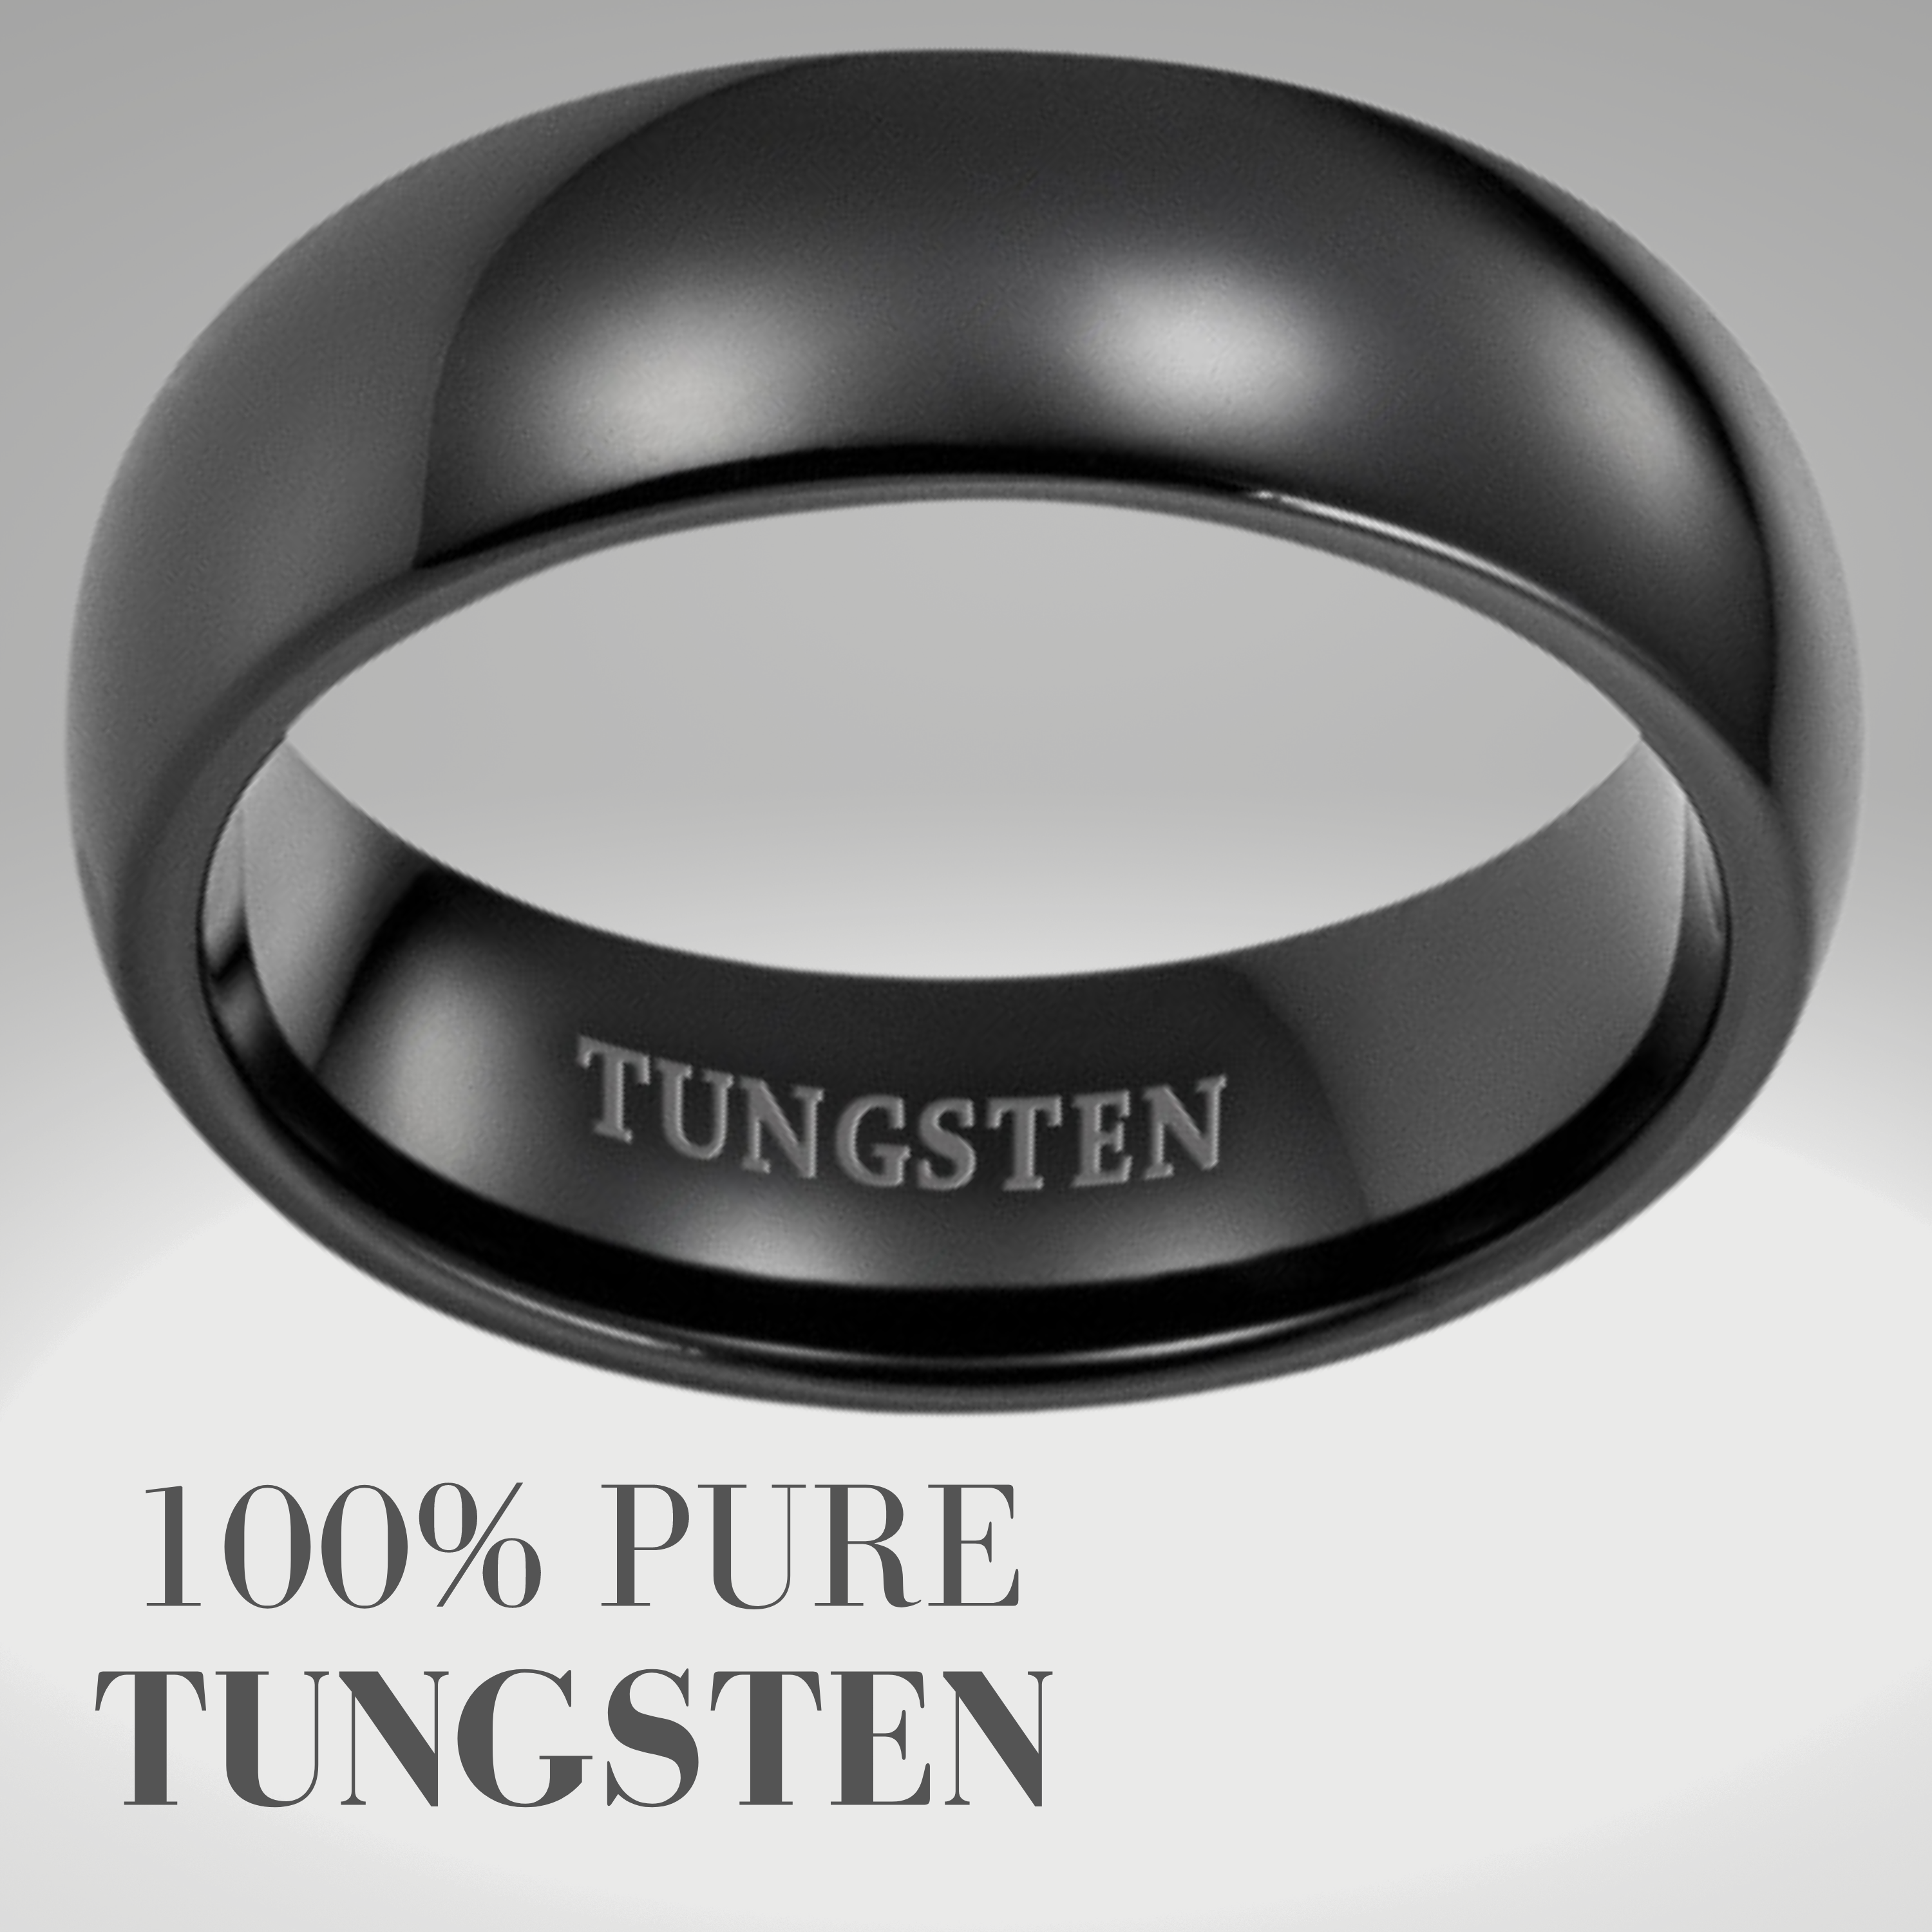 Mens Black Tungsten Ring etched Forever Together 7mm